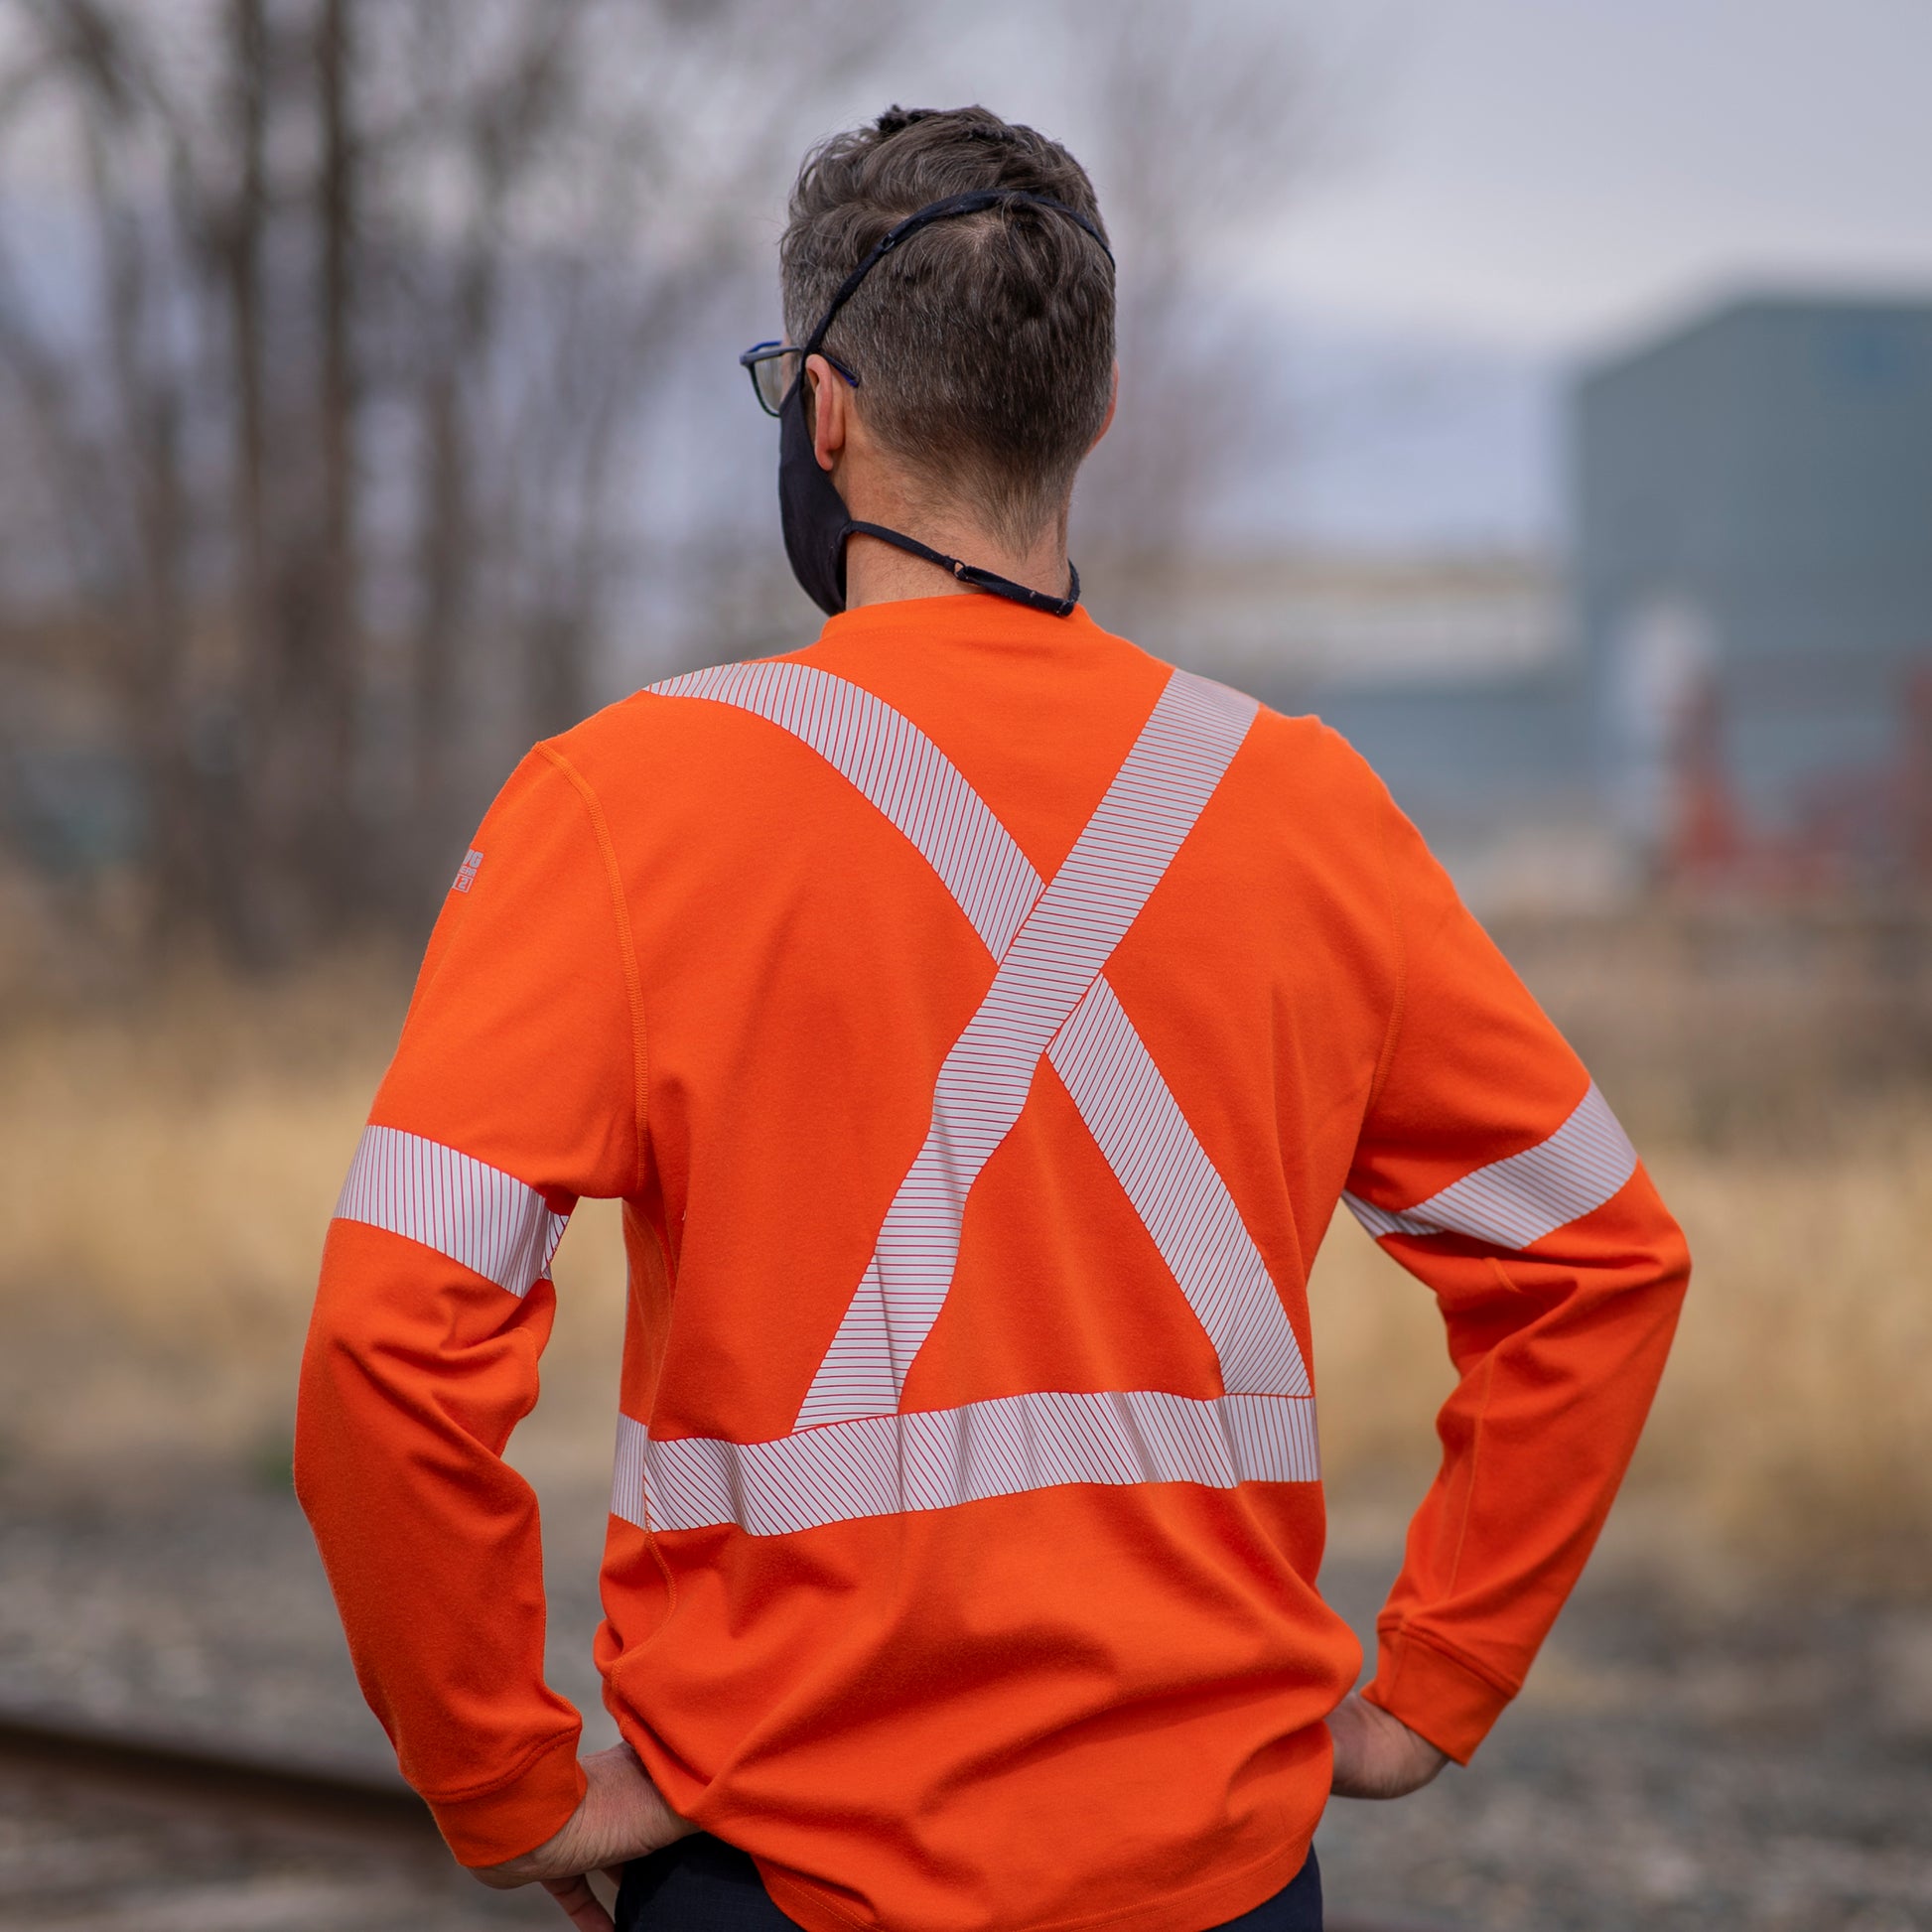 Back view of MWG EVOLUTION FR Long-Sleeve T-Shirt. MWG EVOLUTION Shirt is bright orange in colour with silver segmented reflective tape to meet CSA Z96-15 Hi-Vis standard. MWG EVOLUTION is a proprietary flame-resistant FR fabric blend that is lightweight with an 11 ATPV.